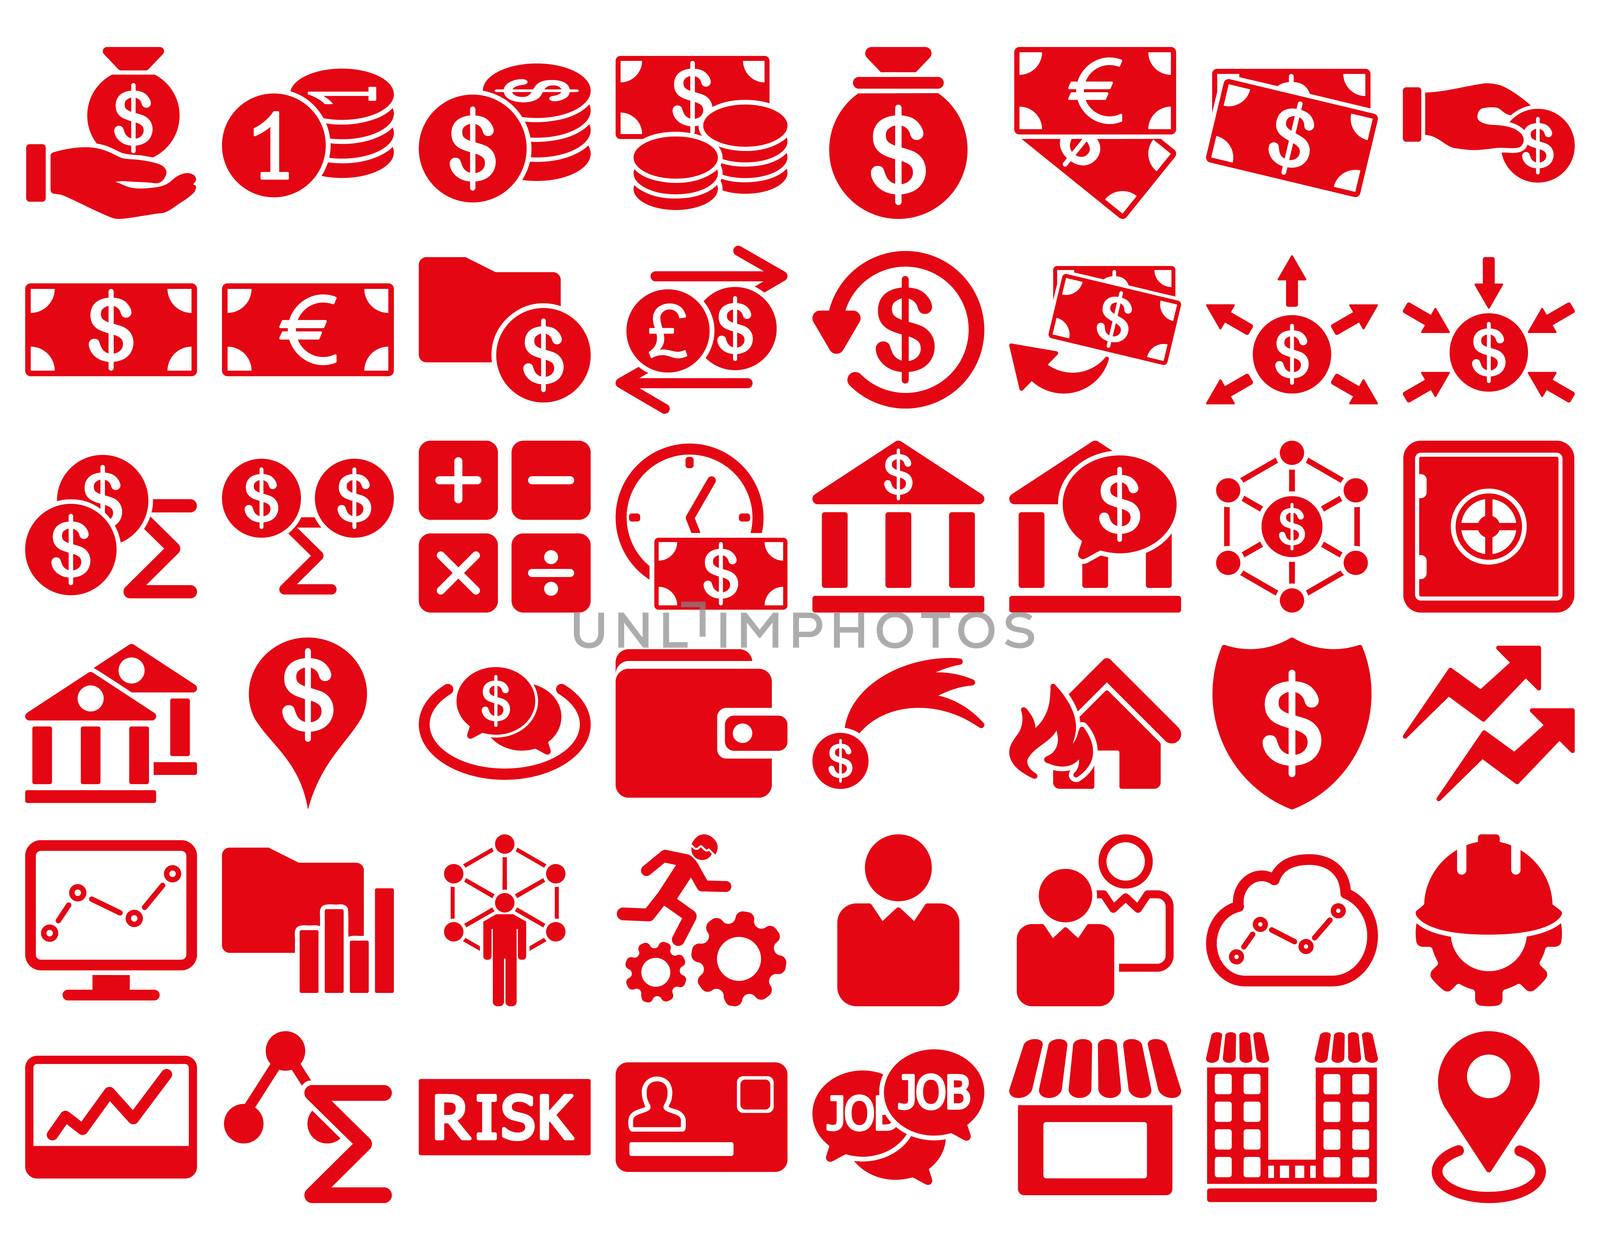 Business Icon Set. These flat icons use red color. Raster images are isolated on a white background.